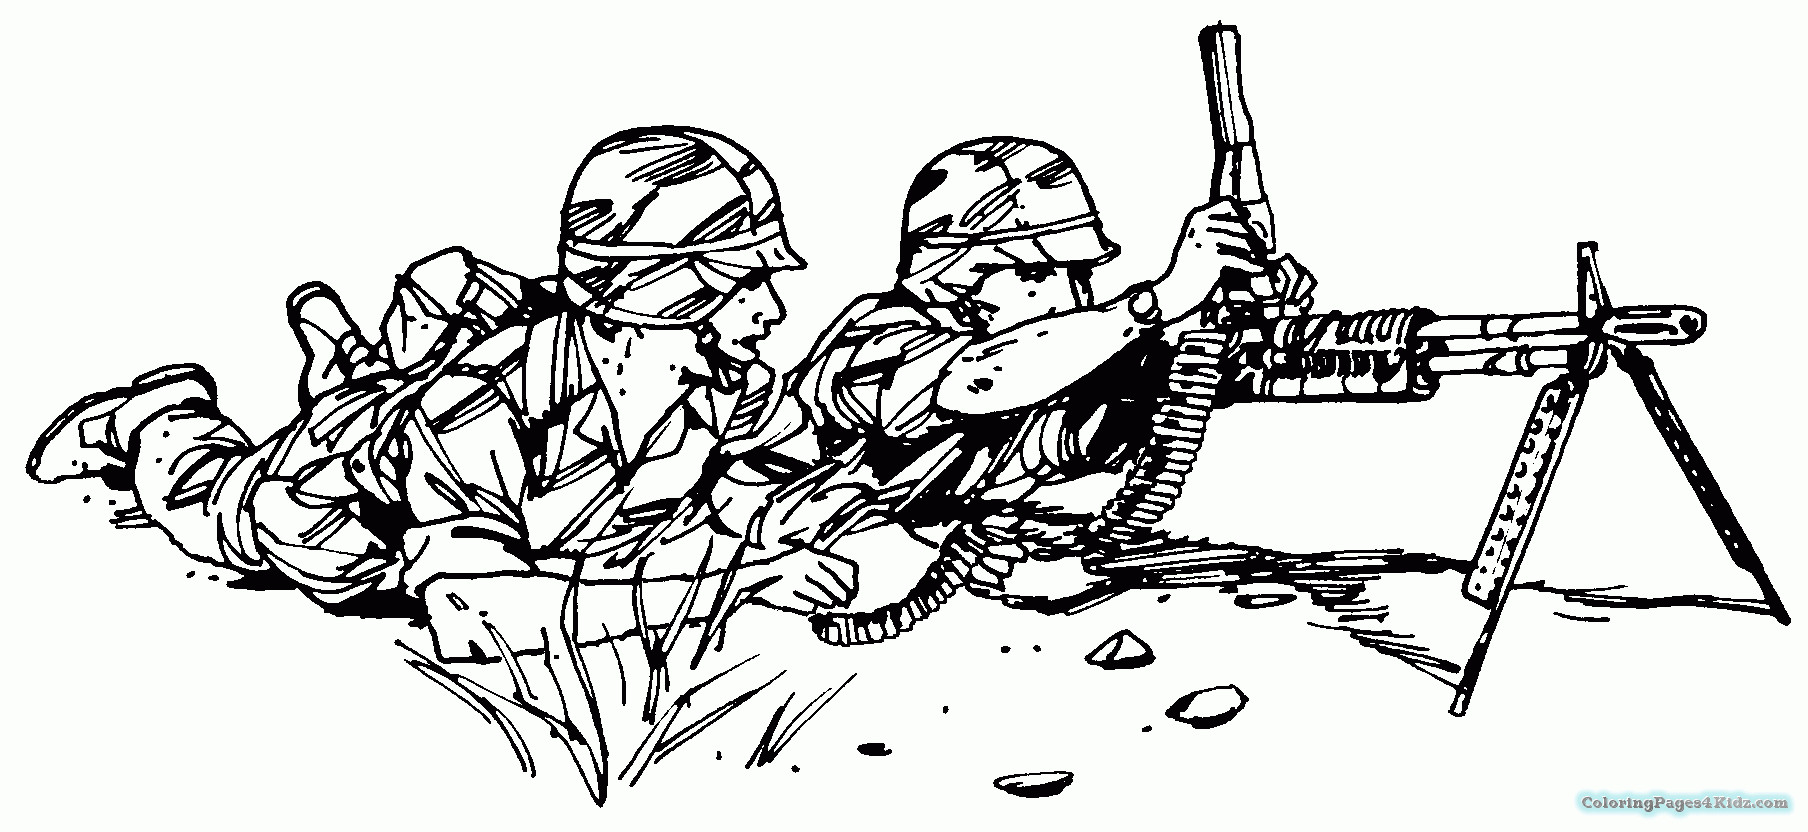 Military Coloring Pages For Kids
 Green Army Guy Coloring Pages